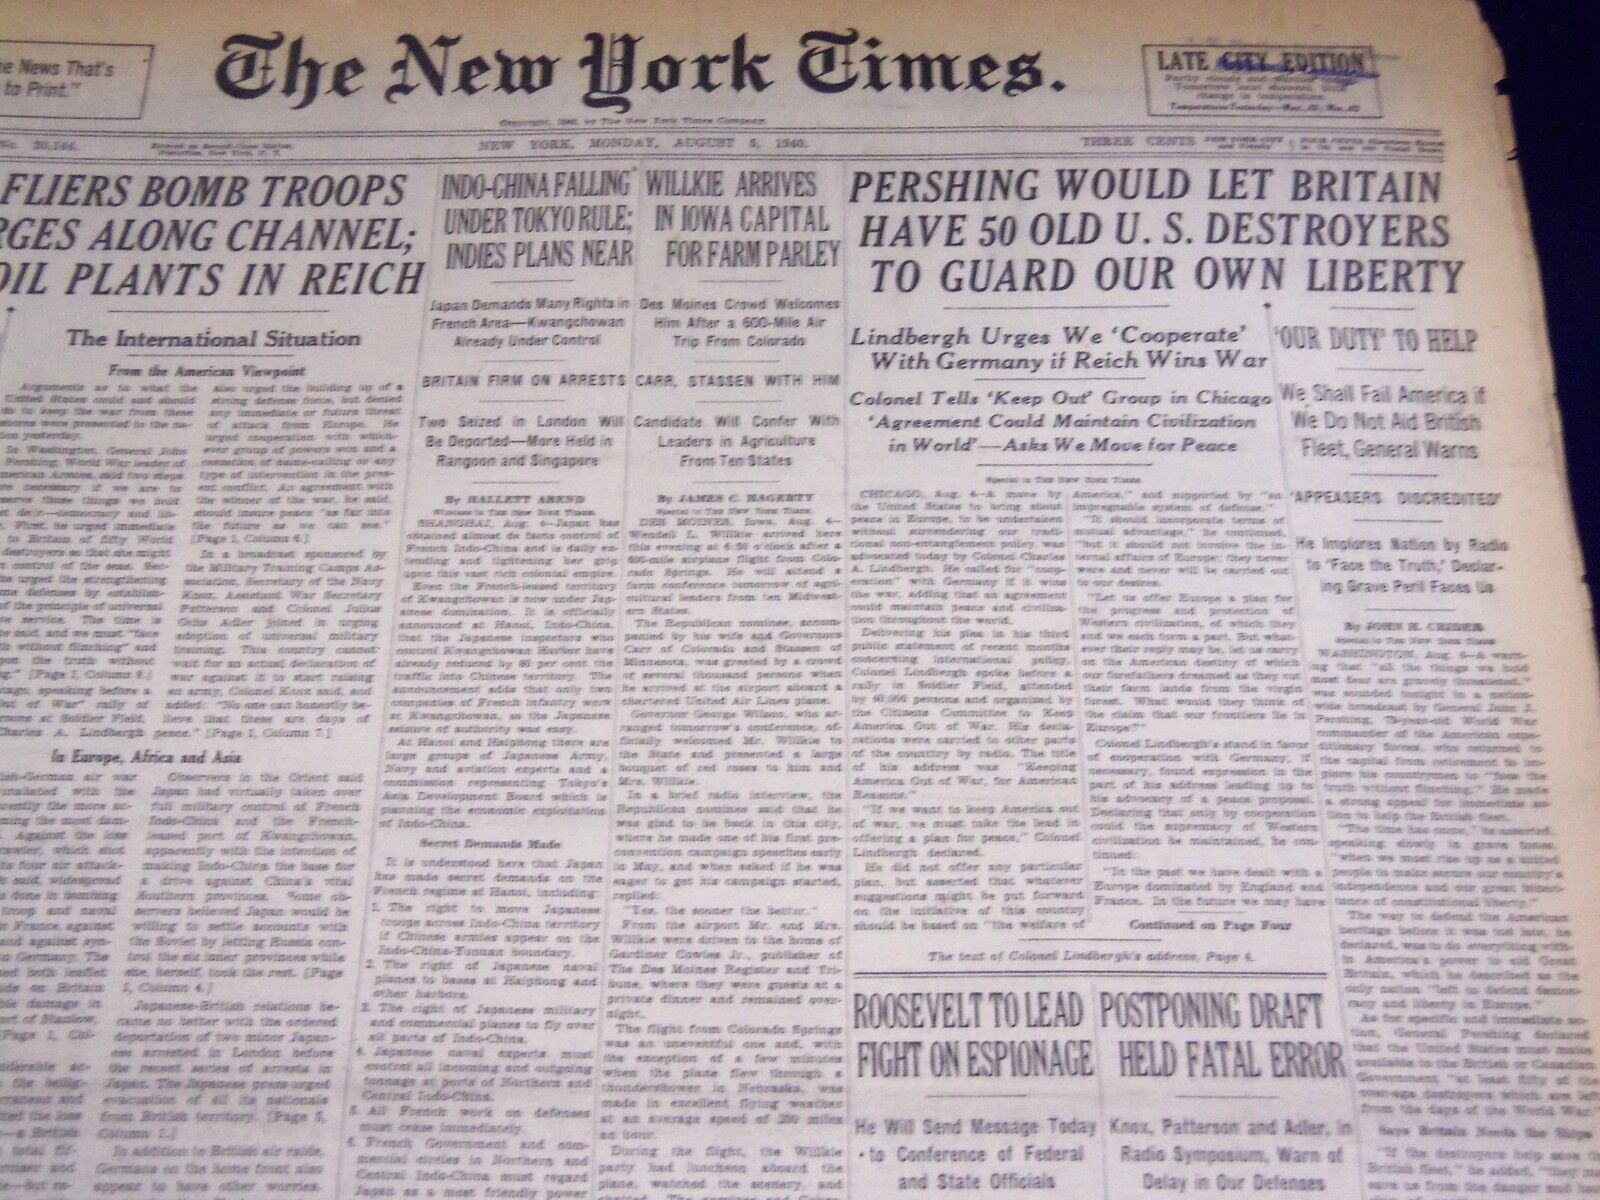 1940 AUG 5 NEW YORK TIMES - PERSHING WOULD LET BRITAIN HAVE DESTROYERS - NT 2511